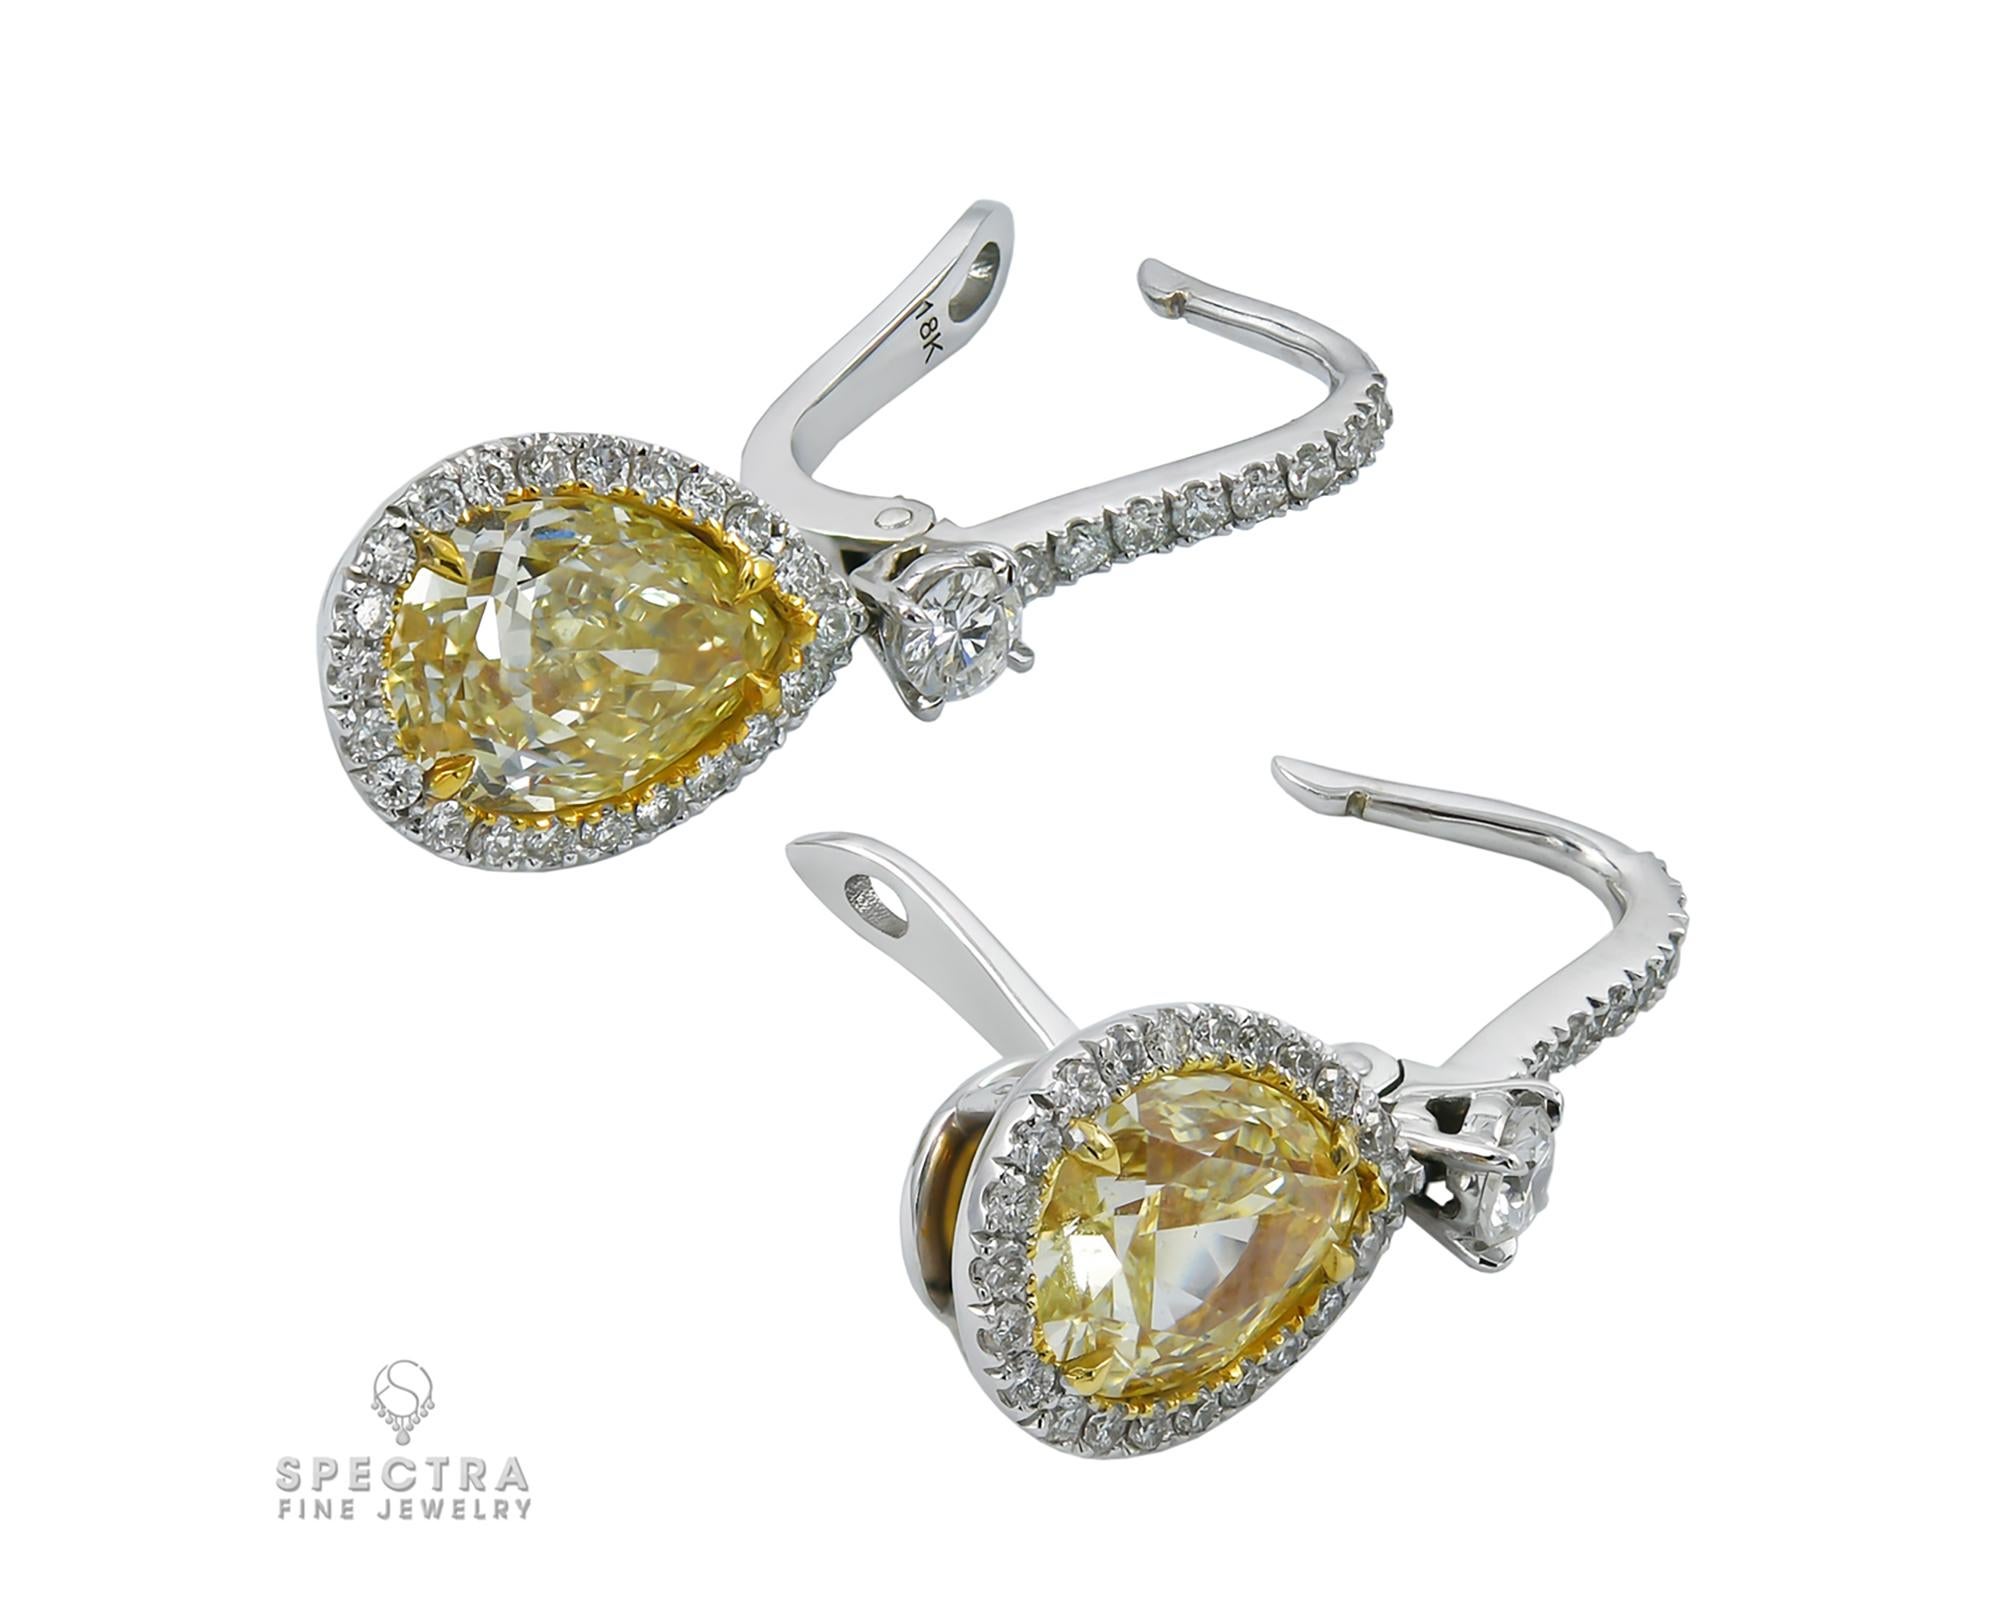 Beautiful drop earrings, decorated with two pear-shape fancy light yellow diamonds accented by white round diamonds, mounted in platinum and 18k yellow gold. 
Yellow diamonds are accompanied by the GIA certificates, stating that they are 3.32 carats